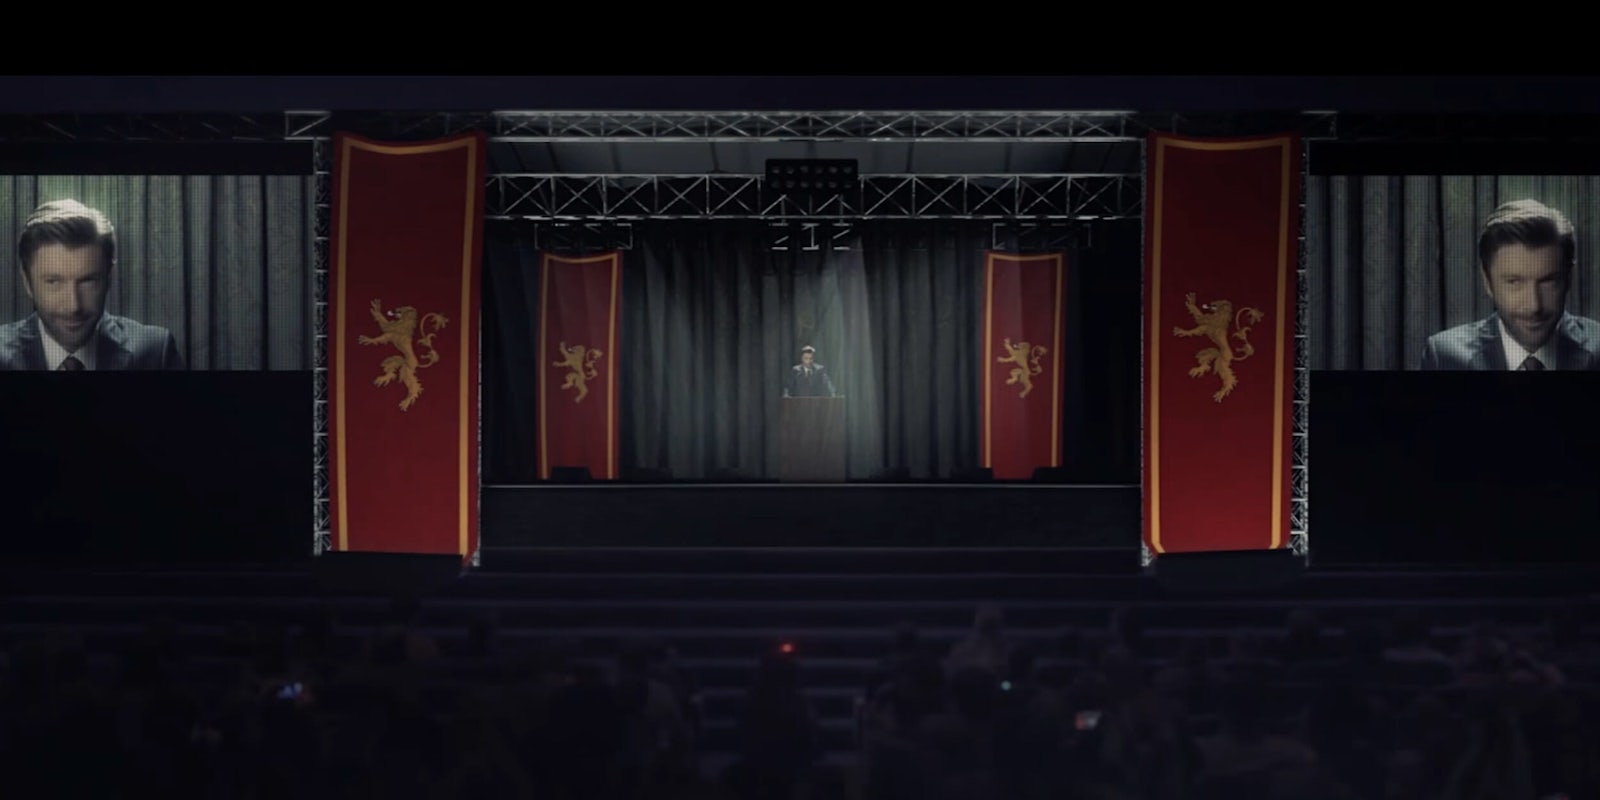 Someone made a modern Game of Thrones fake trailer